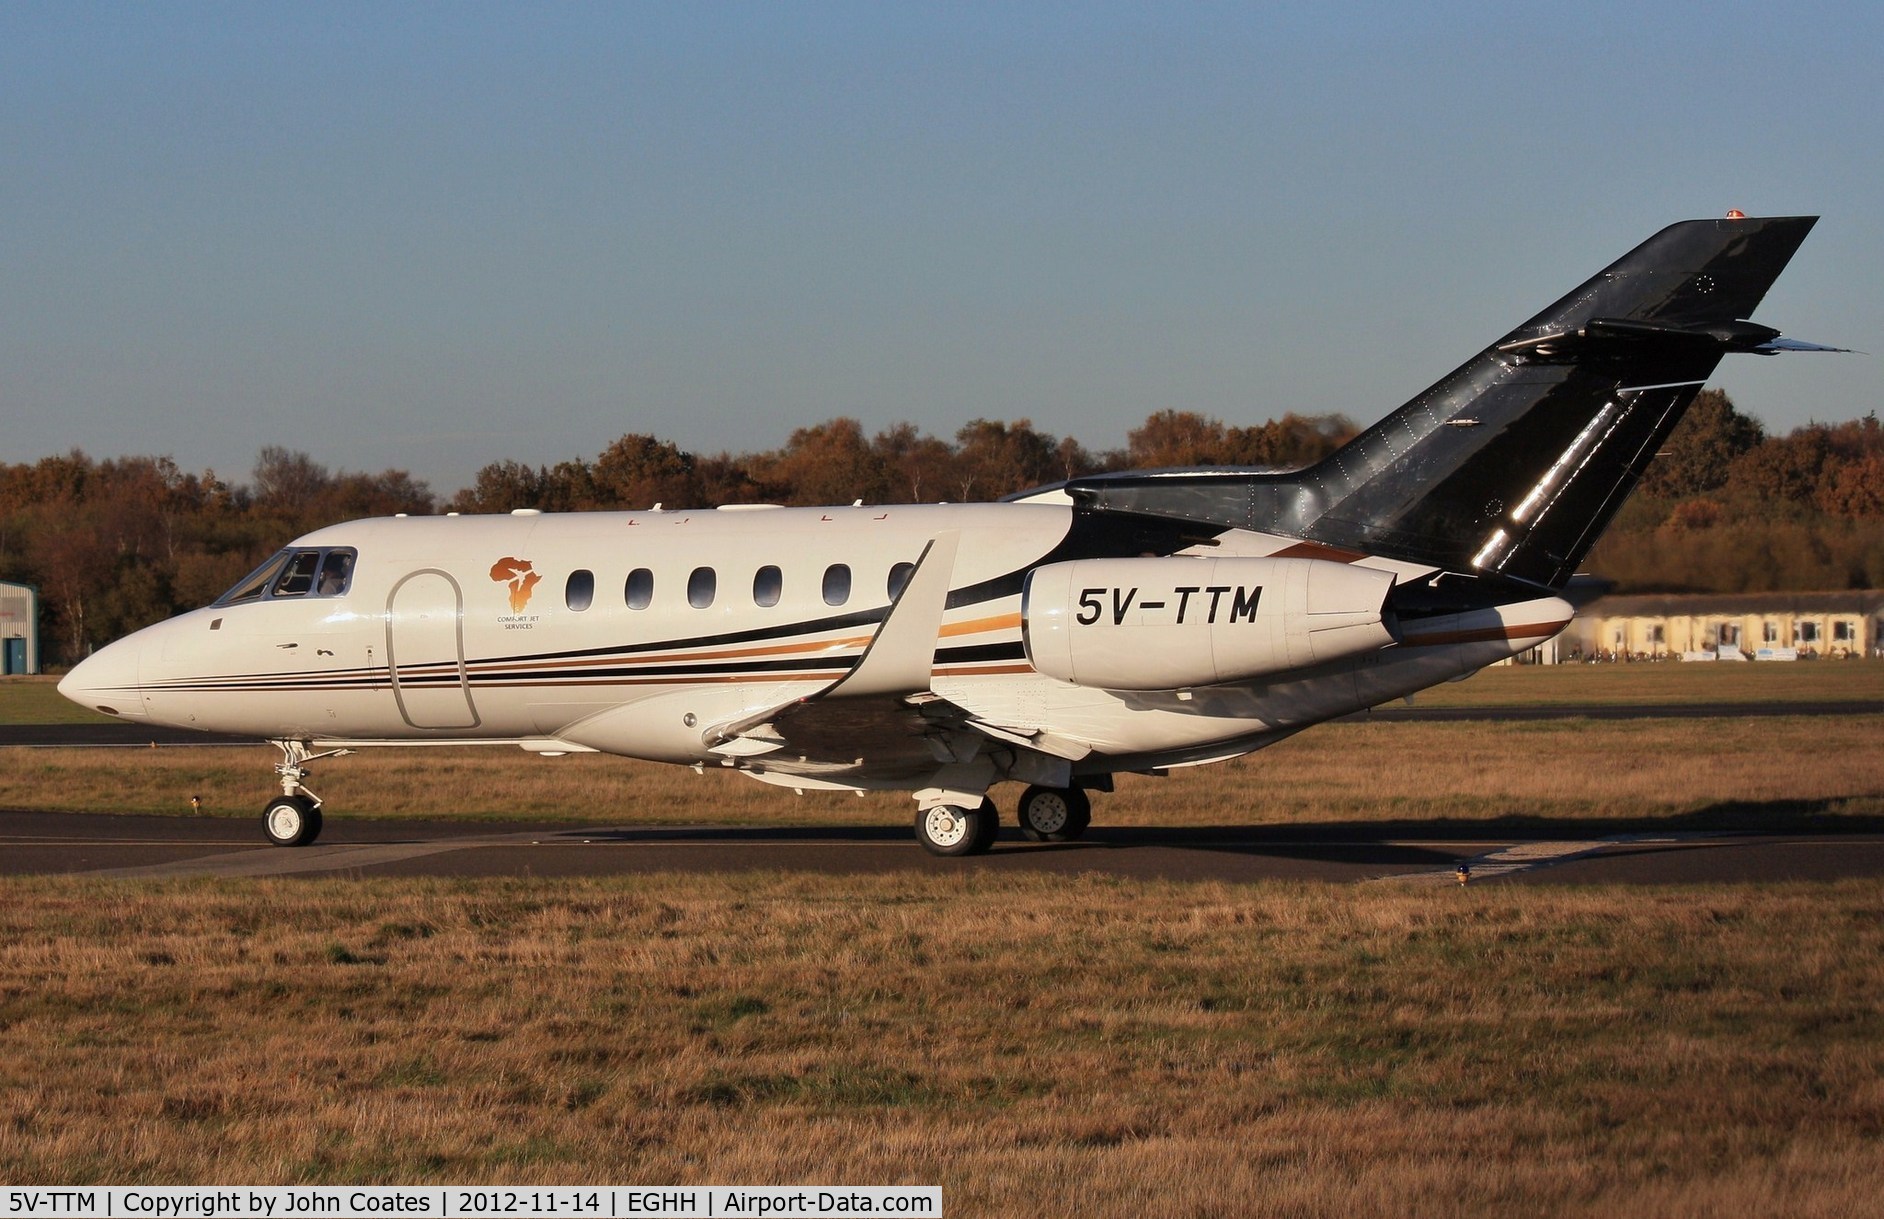 5V-TTM, 2003 Raytheon Hawker 800XP C/N 258632, Taxiing to departure point.